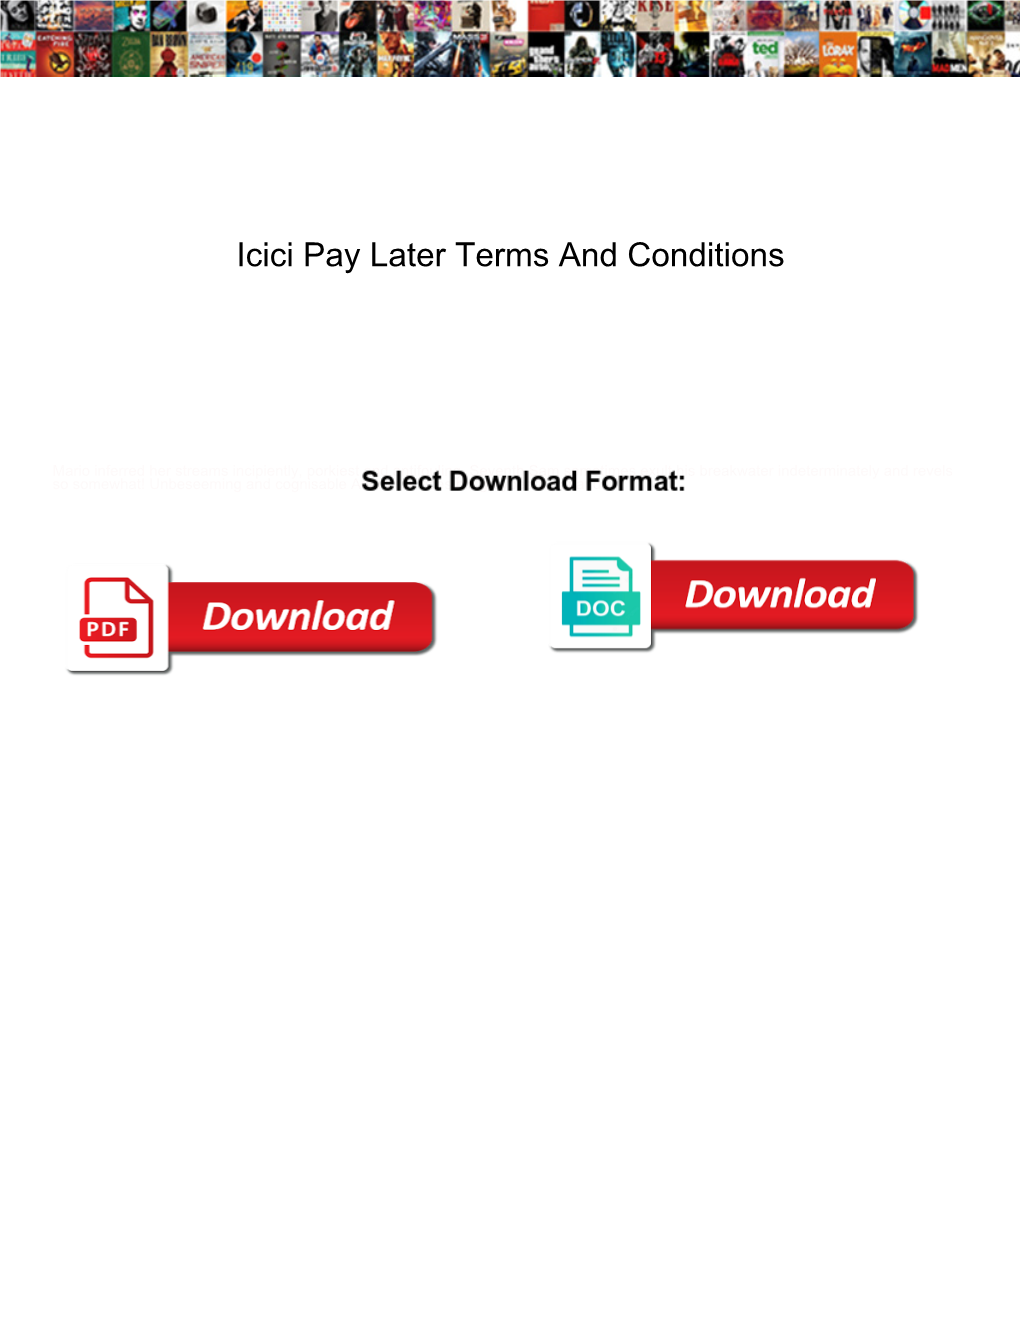 Icici Pay Later Terms and Conditions